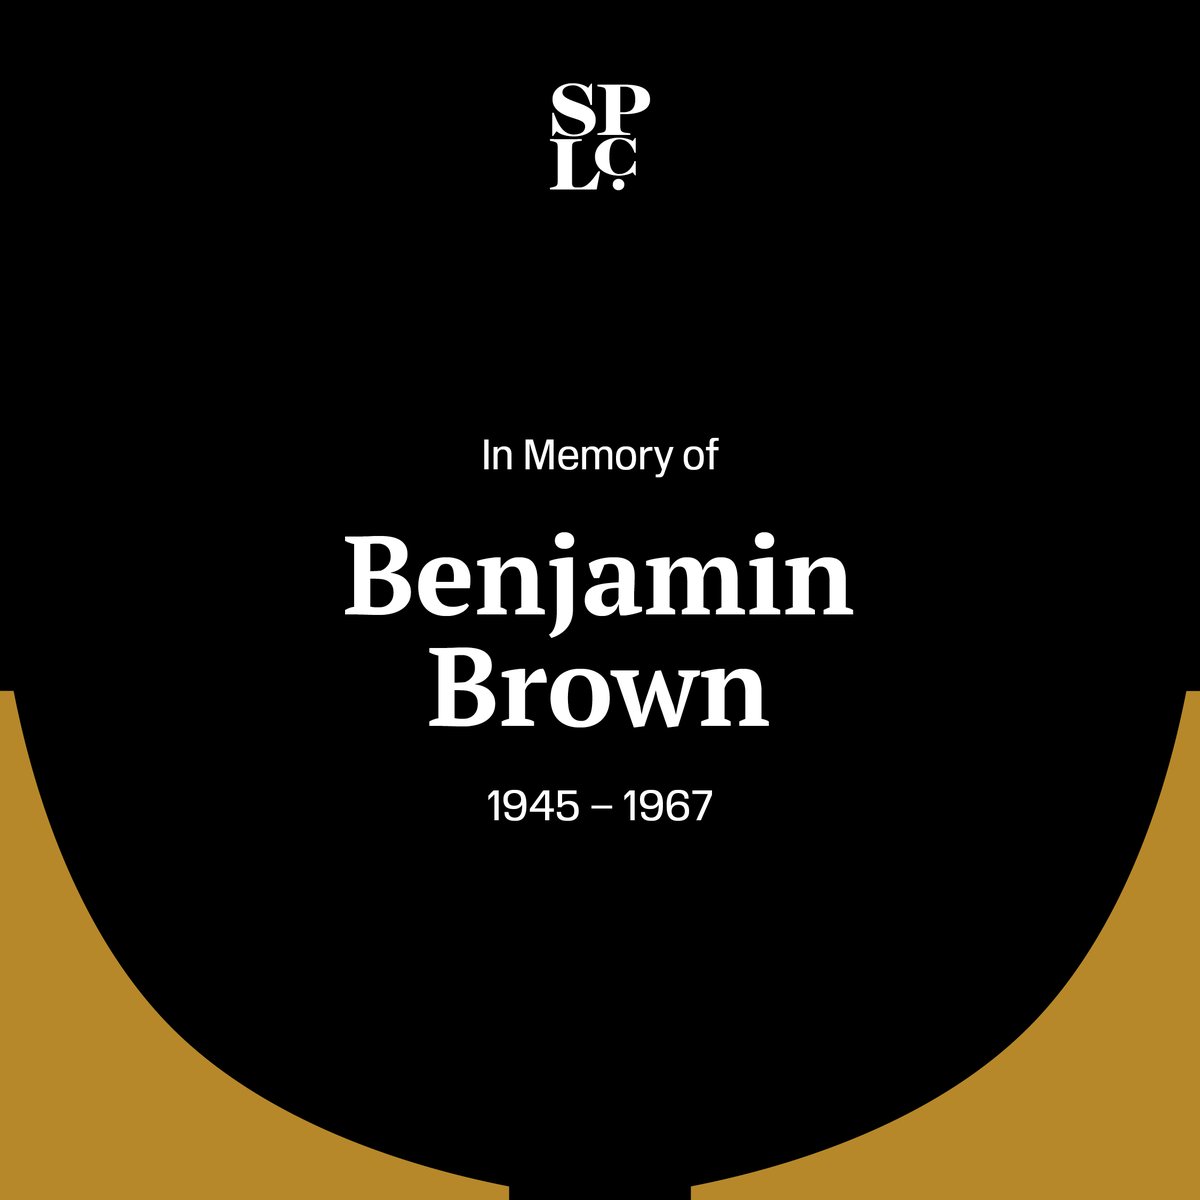 Benjamin Brown, a former civil rights organizer, was watching a student protest from the sidelines in Jackson, Mississippi. He was hit by stray gunshots from police who fired into the crowd. They killed him. Today, #TheMarchContinues #OTD